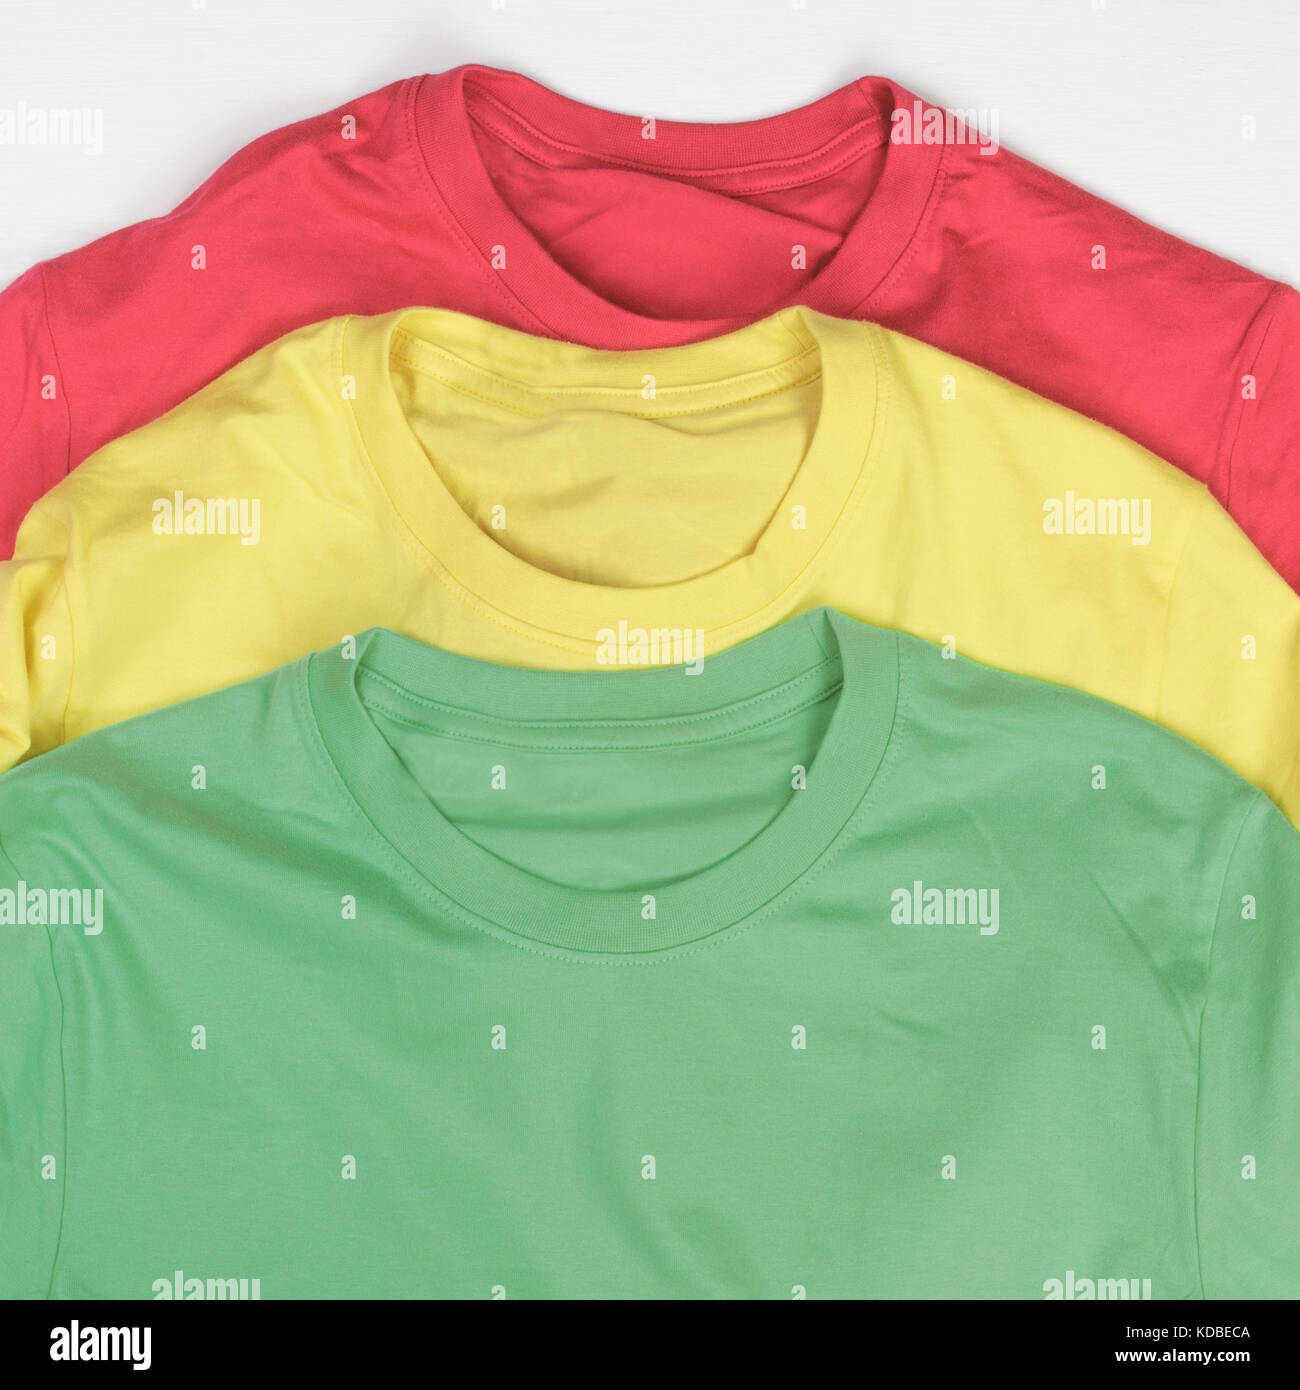 Colorful t-shirts Stock Photo